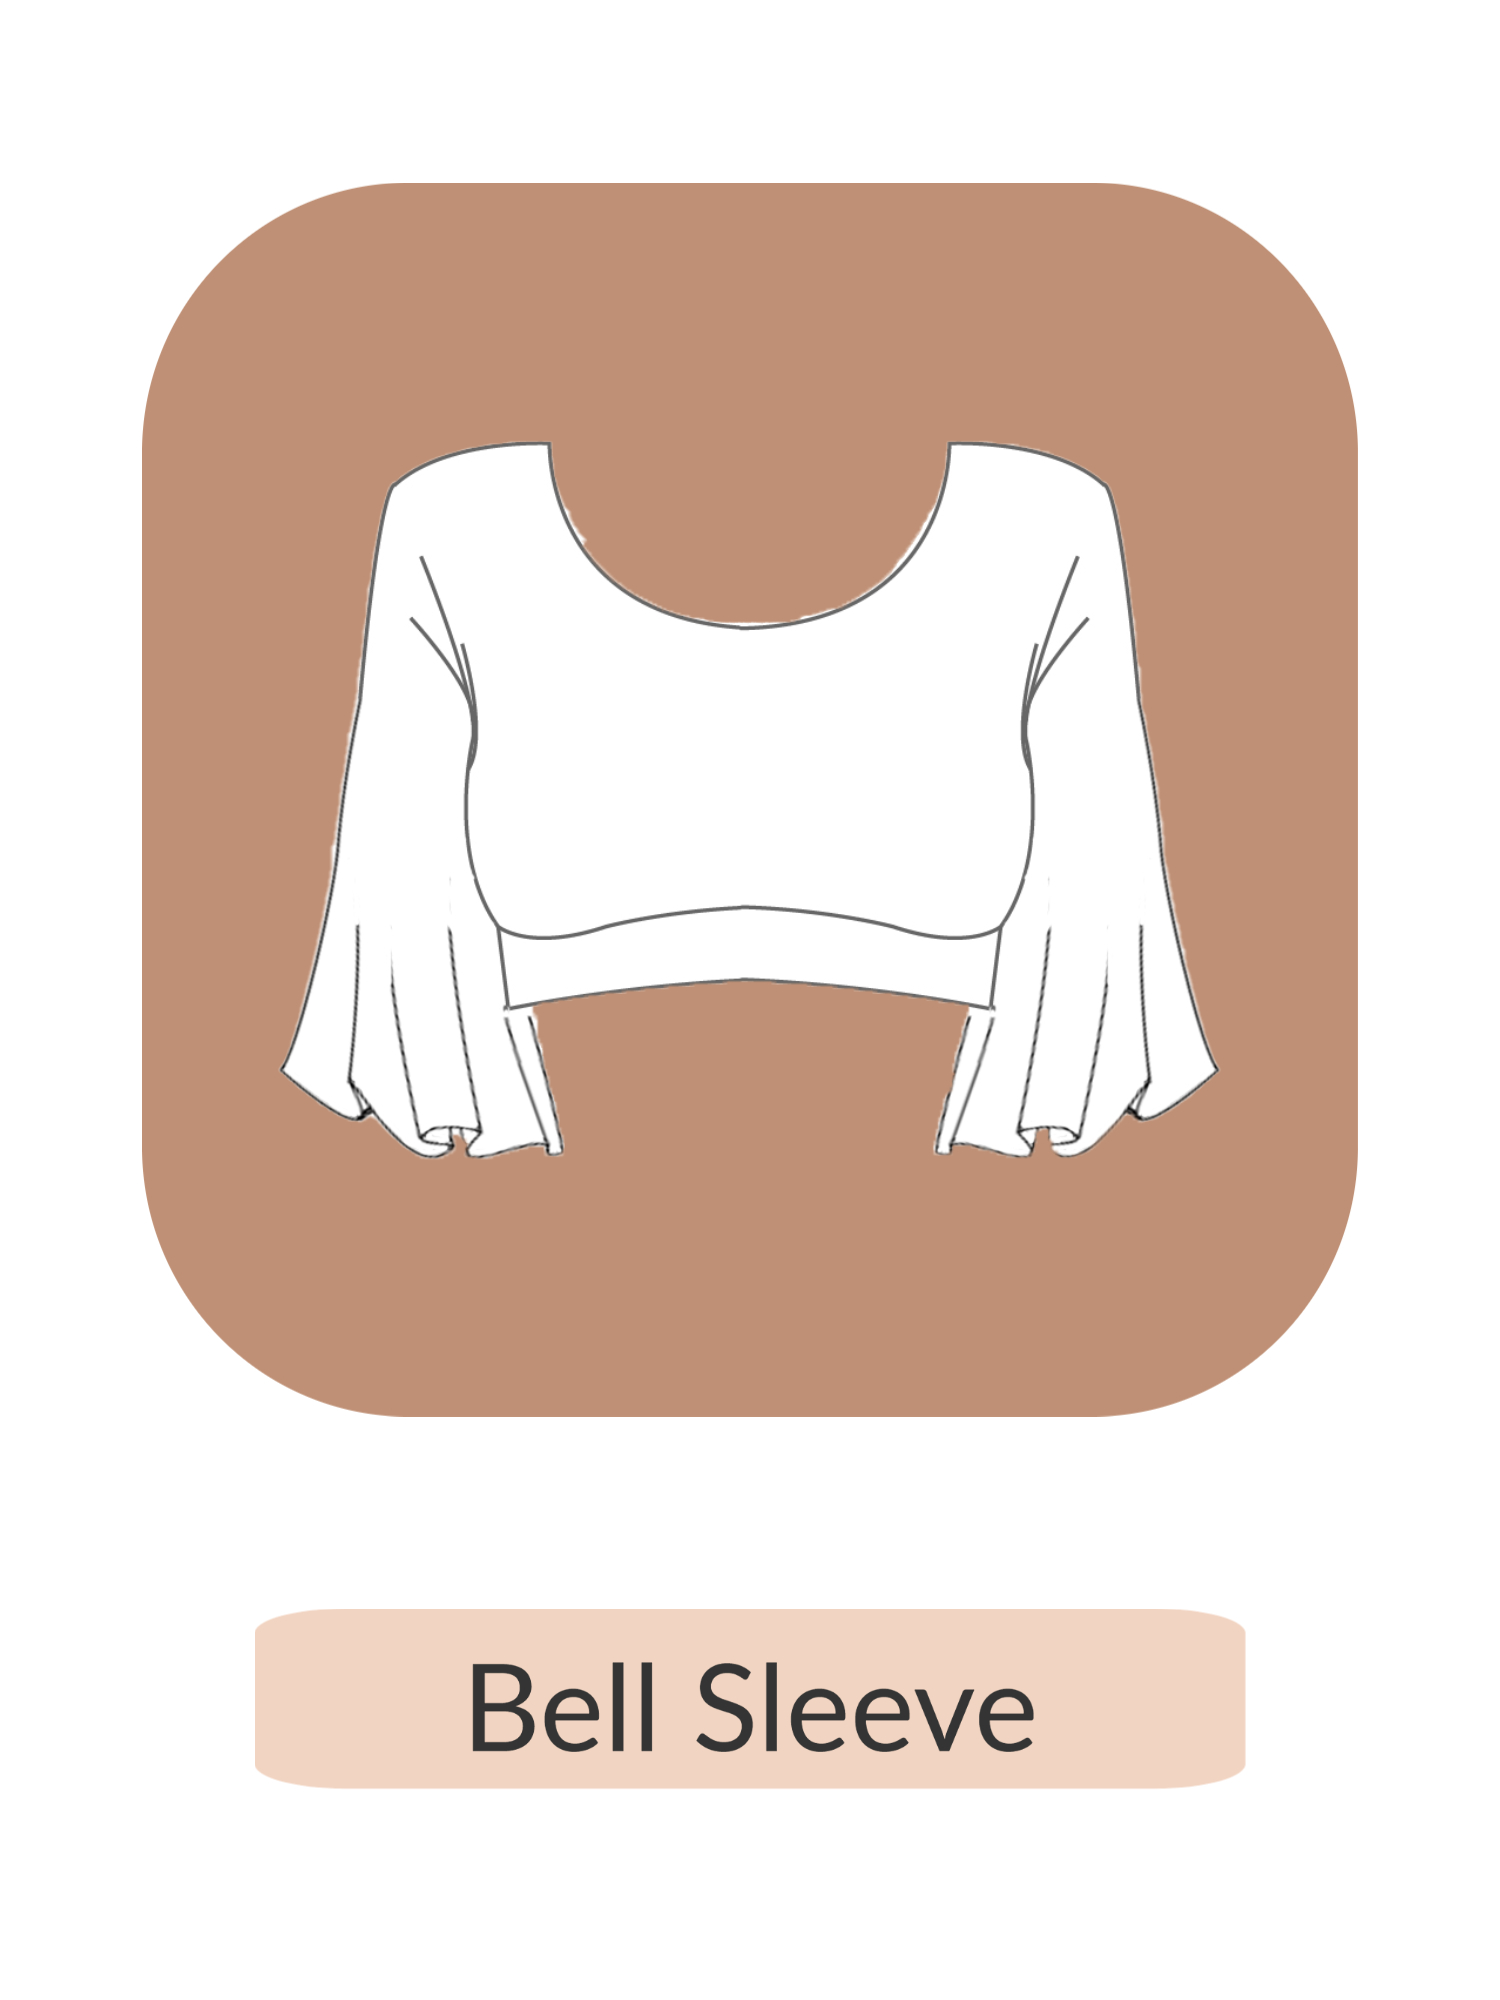 White sleeveless bra top with text 'Bell Sleeve' on it.